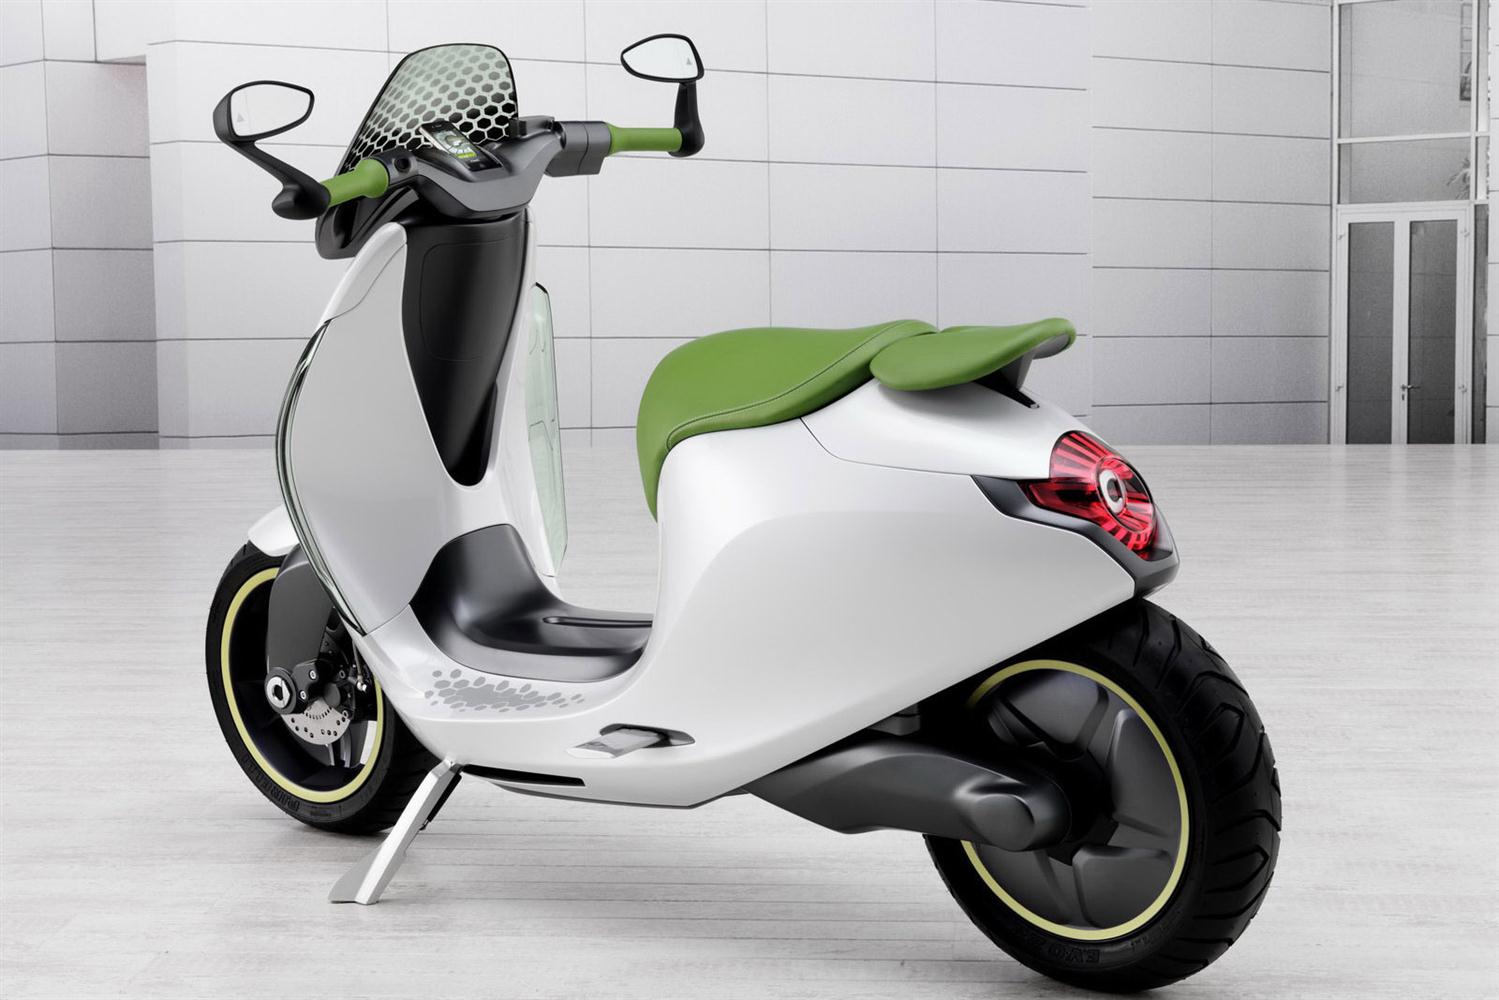 Bosch to produce wheel hub motors for electric scooters | Electric ...